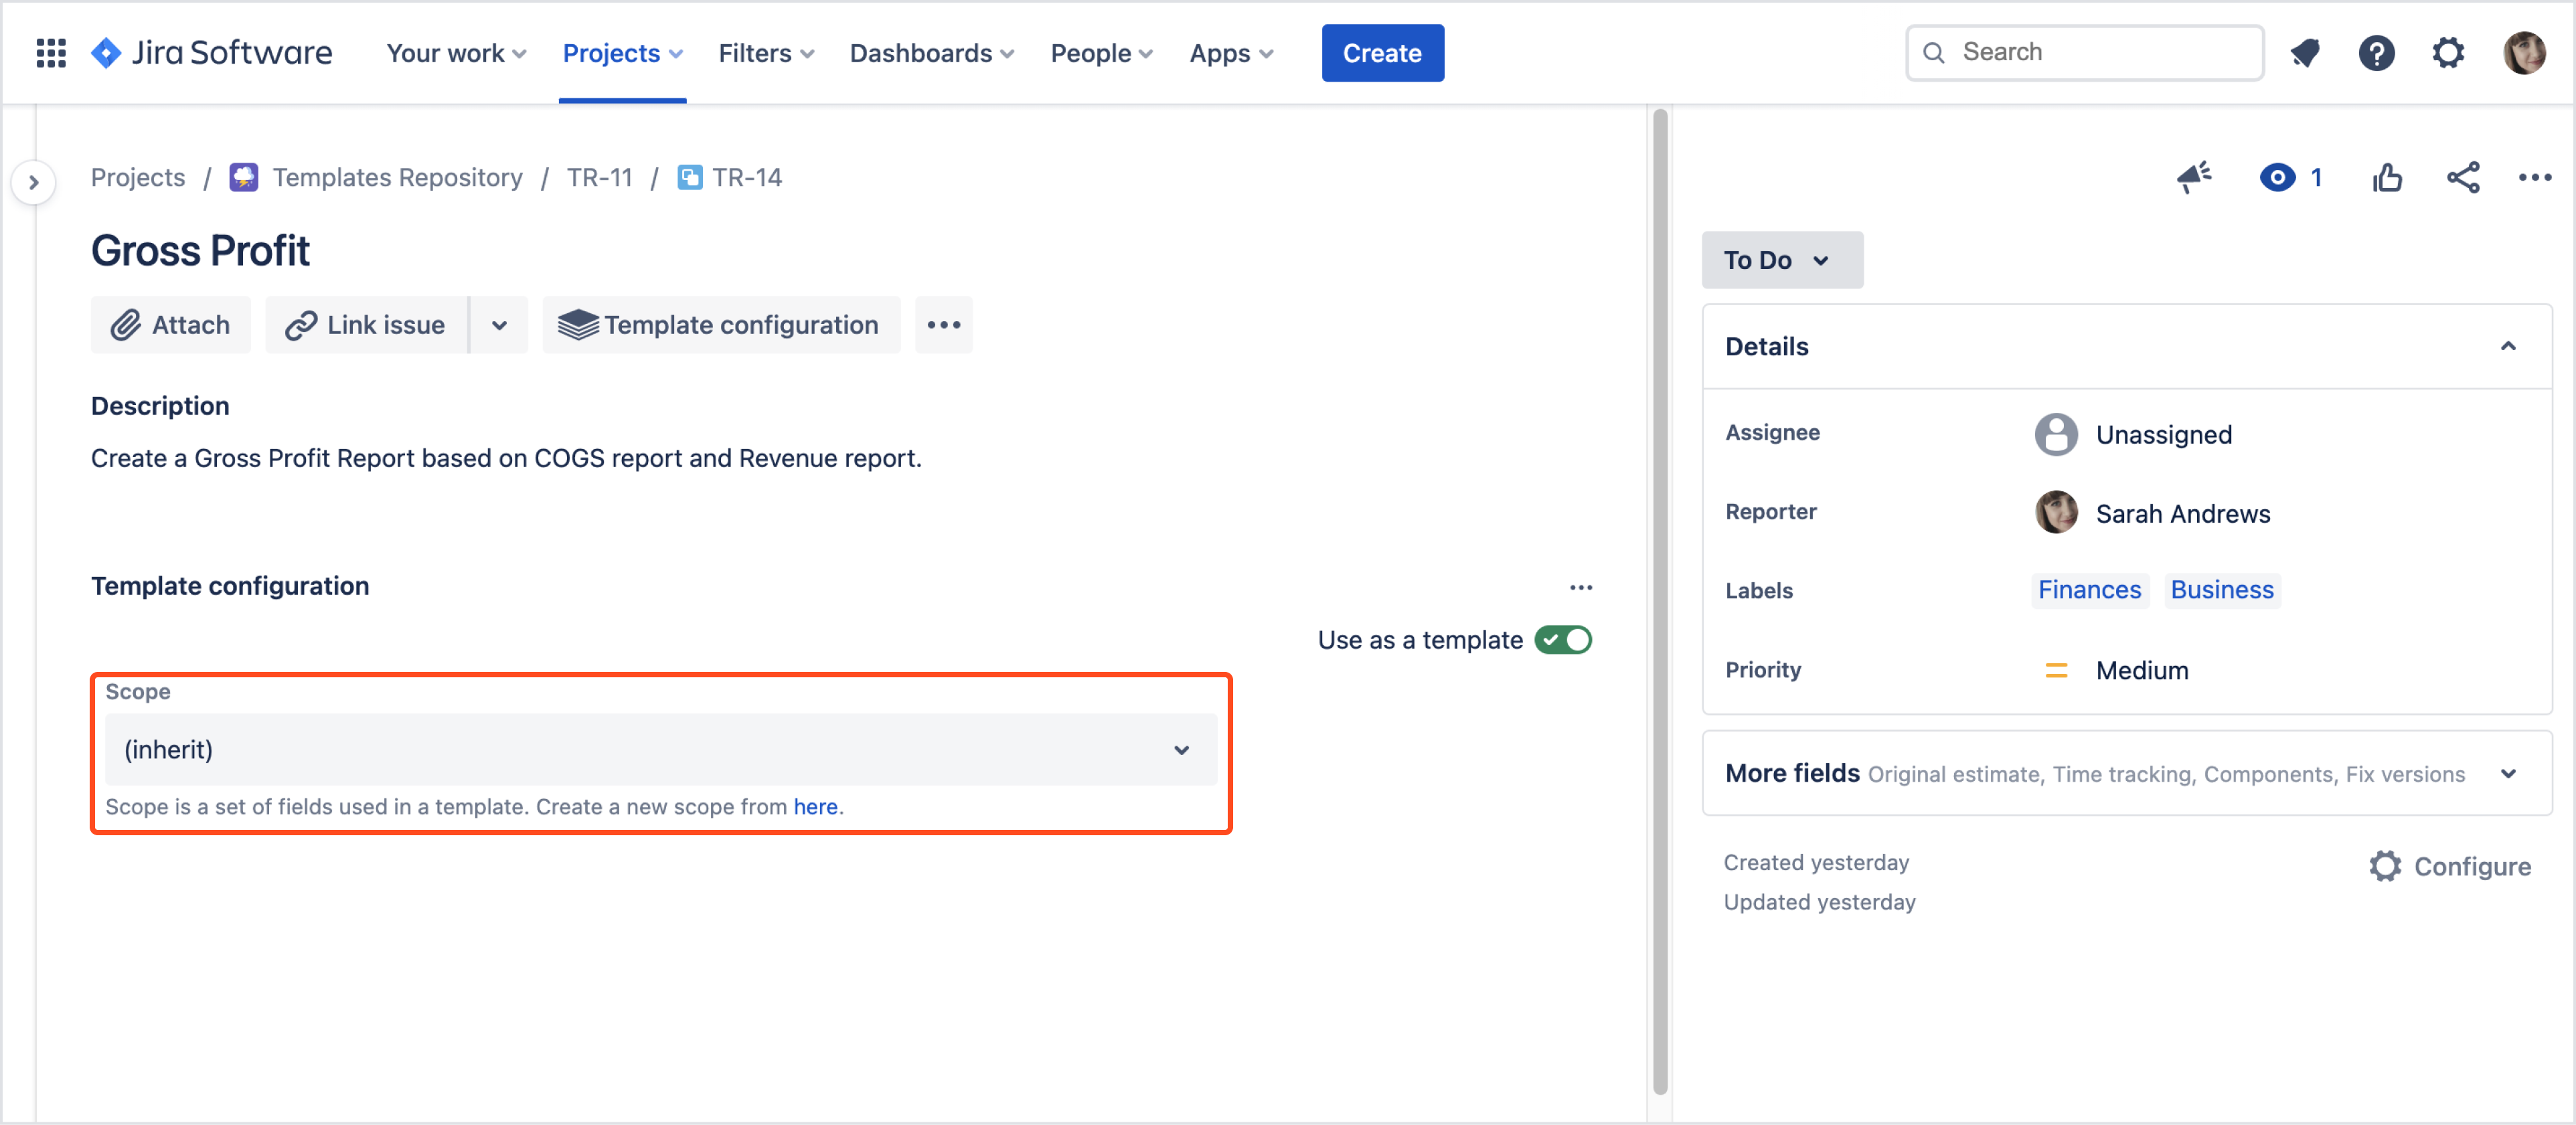 Issue Templates for Jira Cloud: Set of fields - Scope